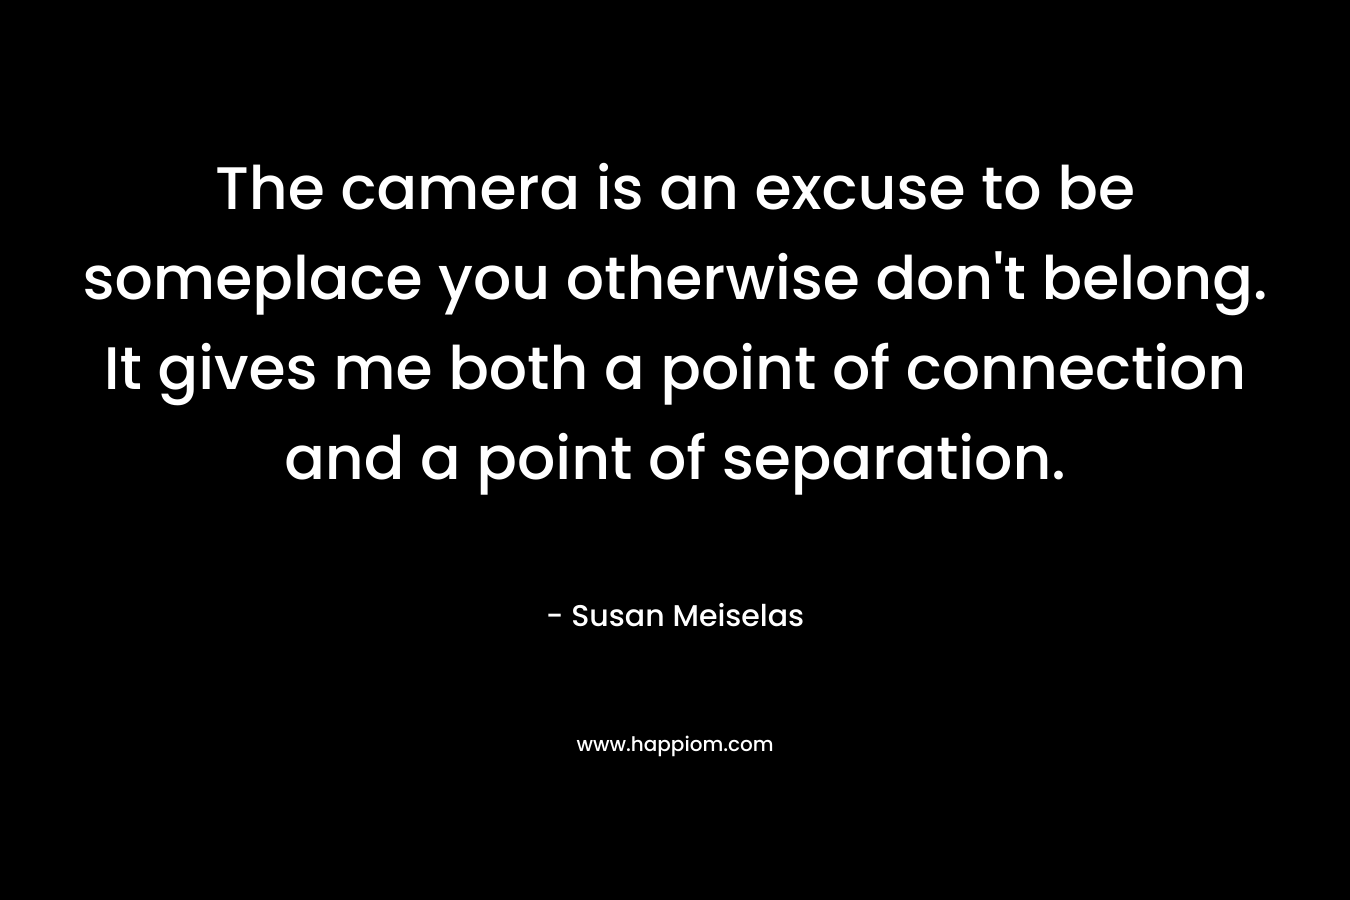 The camera is an excuse to be someplace you otherwise don't belong. It gives me both a point of connection and a point of separation.